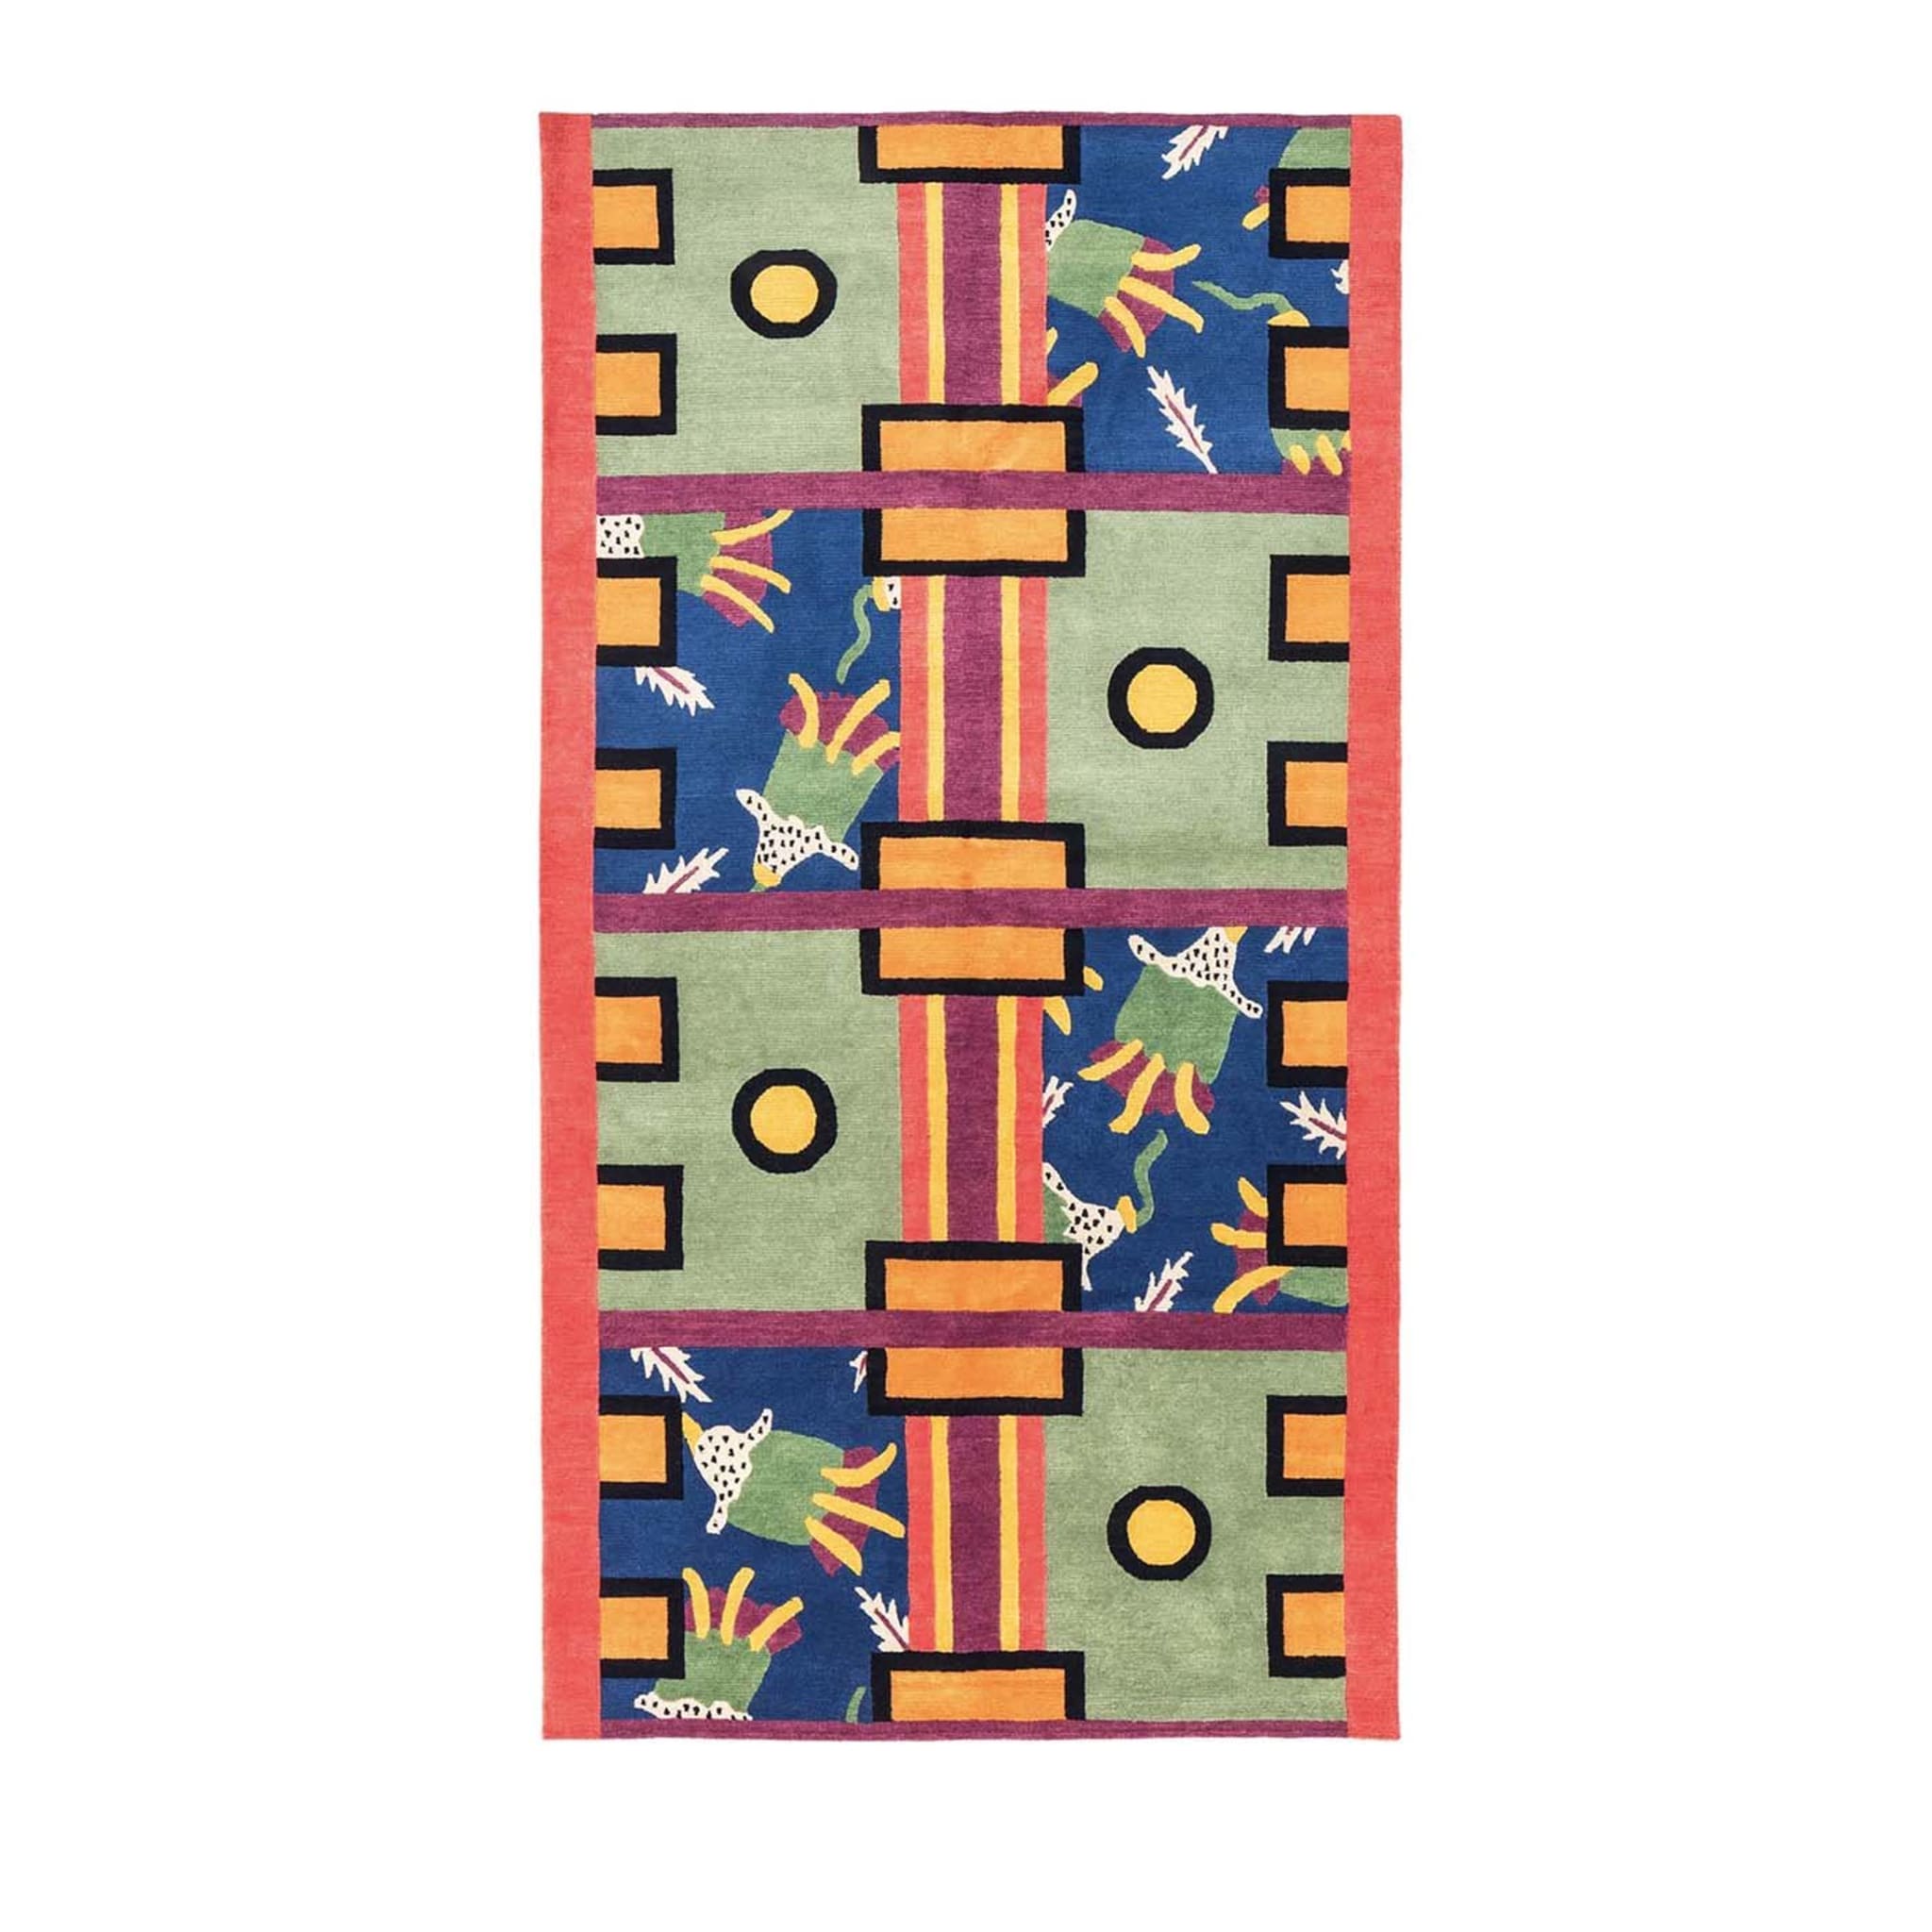 Messico Tapestry by Nathalie Du Pasquier - Post Design - Main view